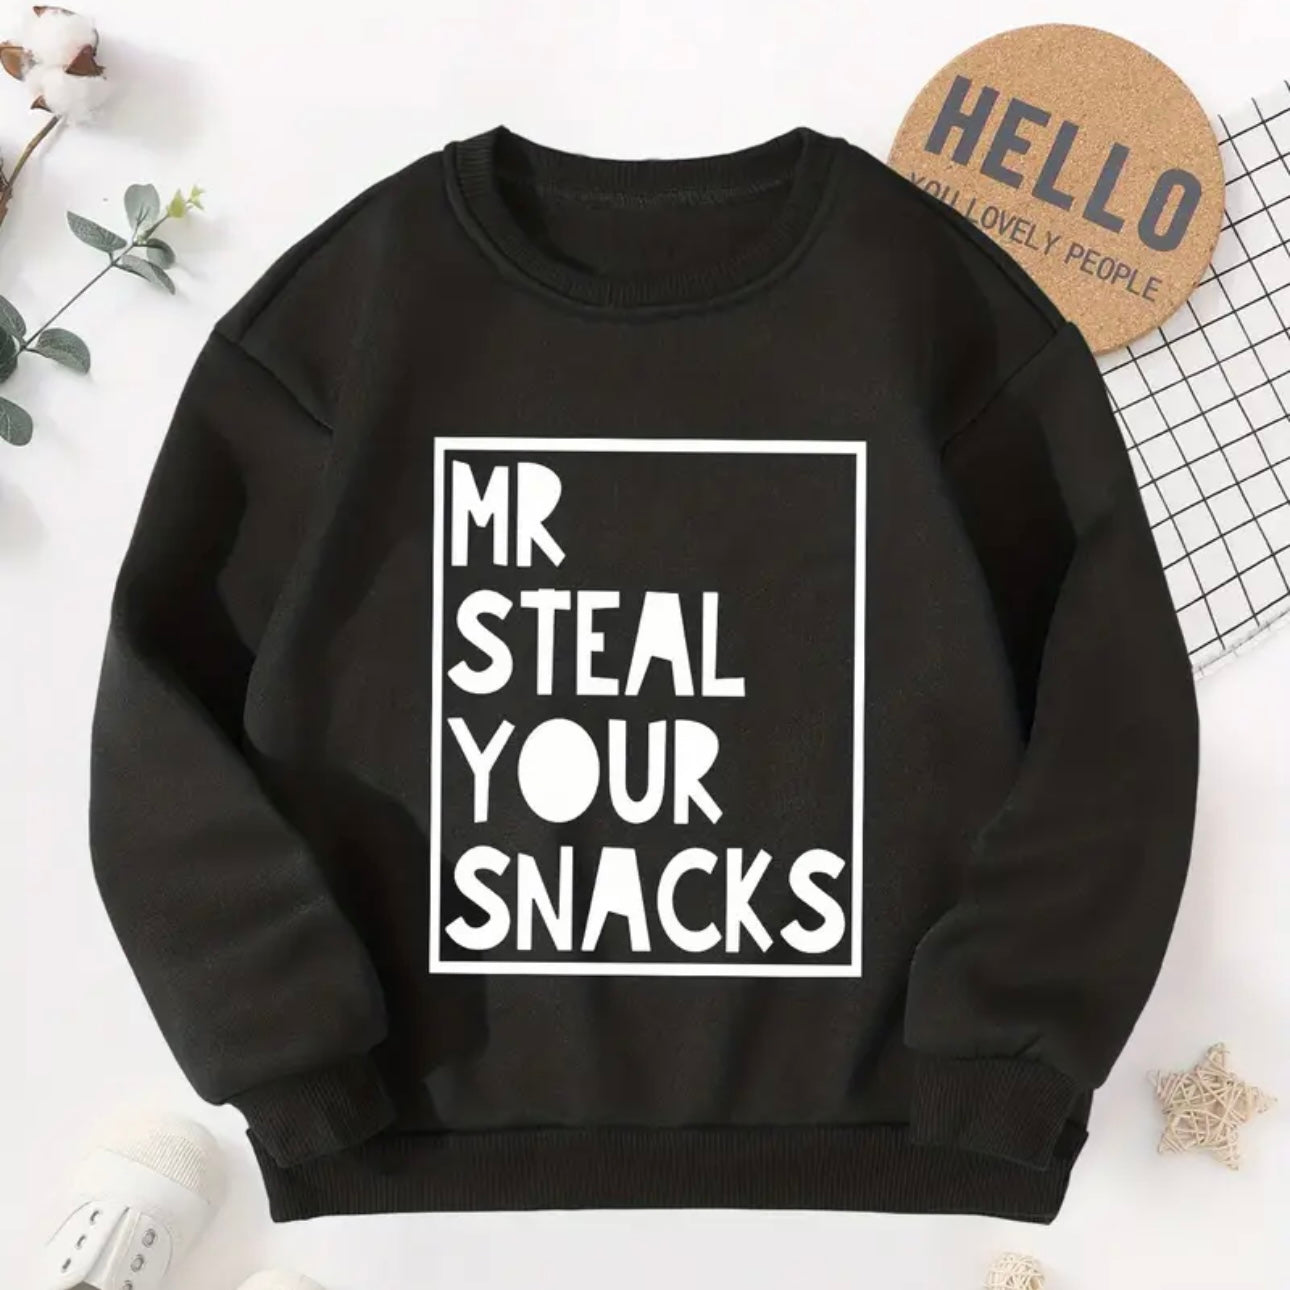 Mr. Steal Your Snacks Sweater